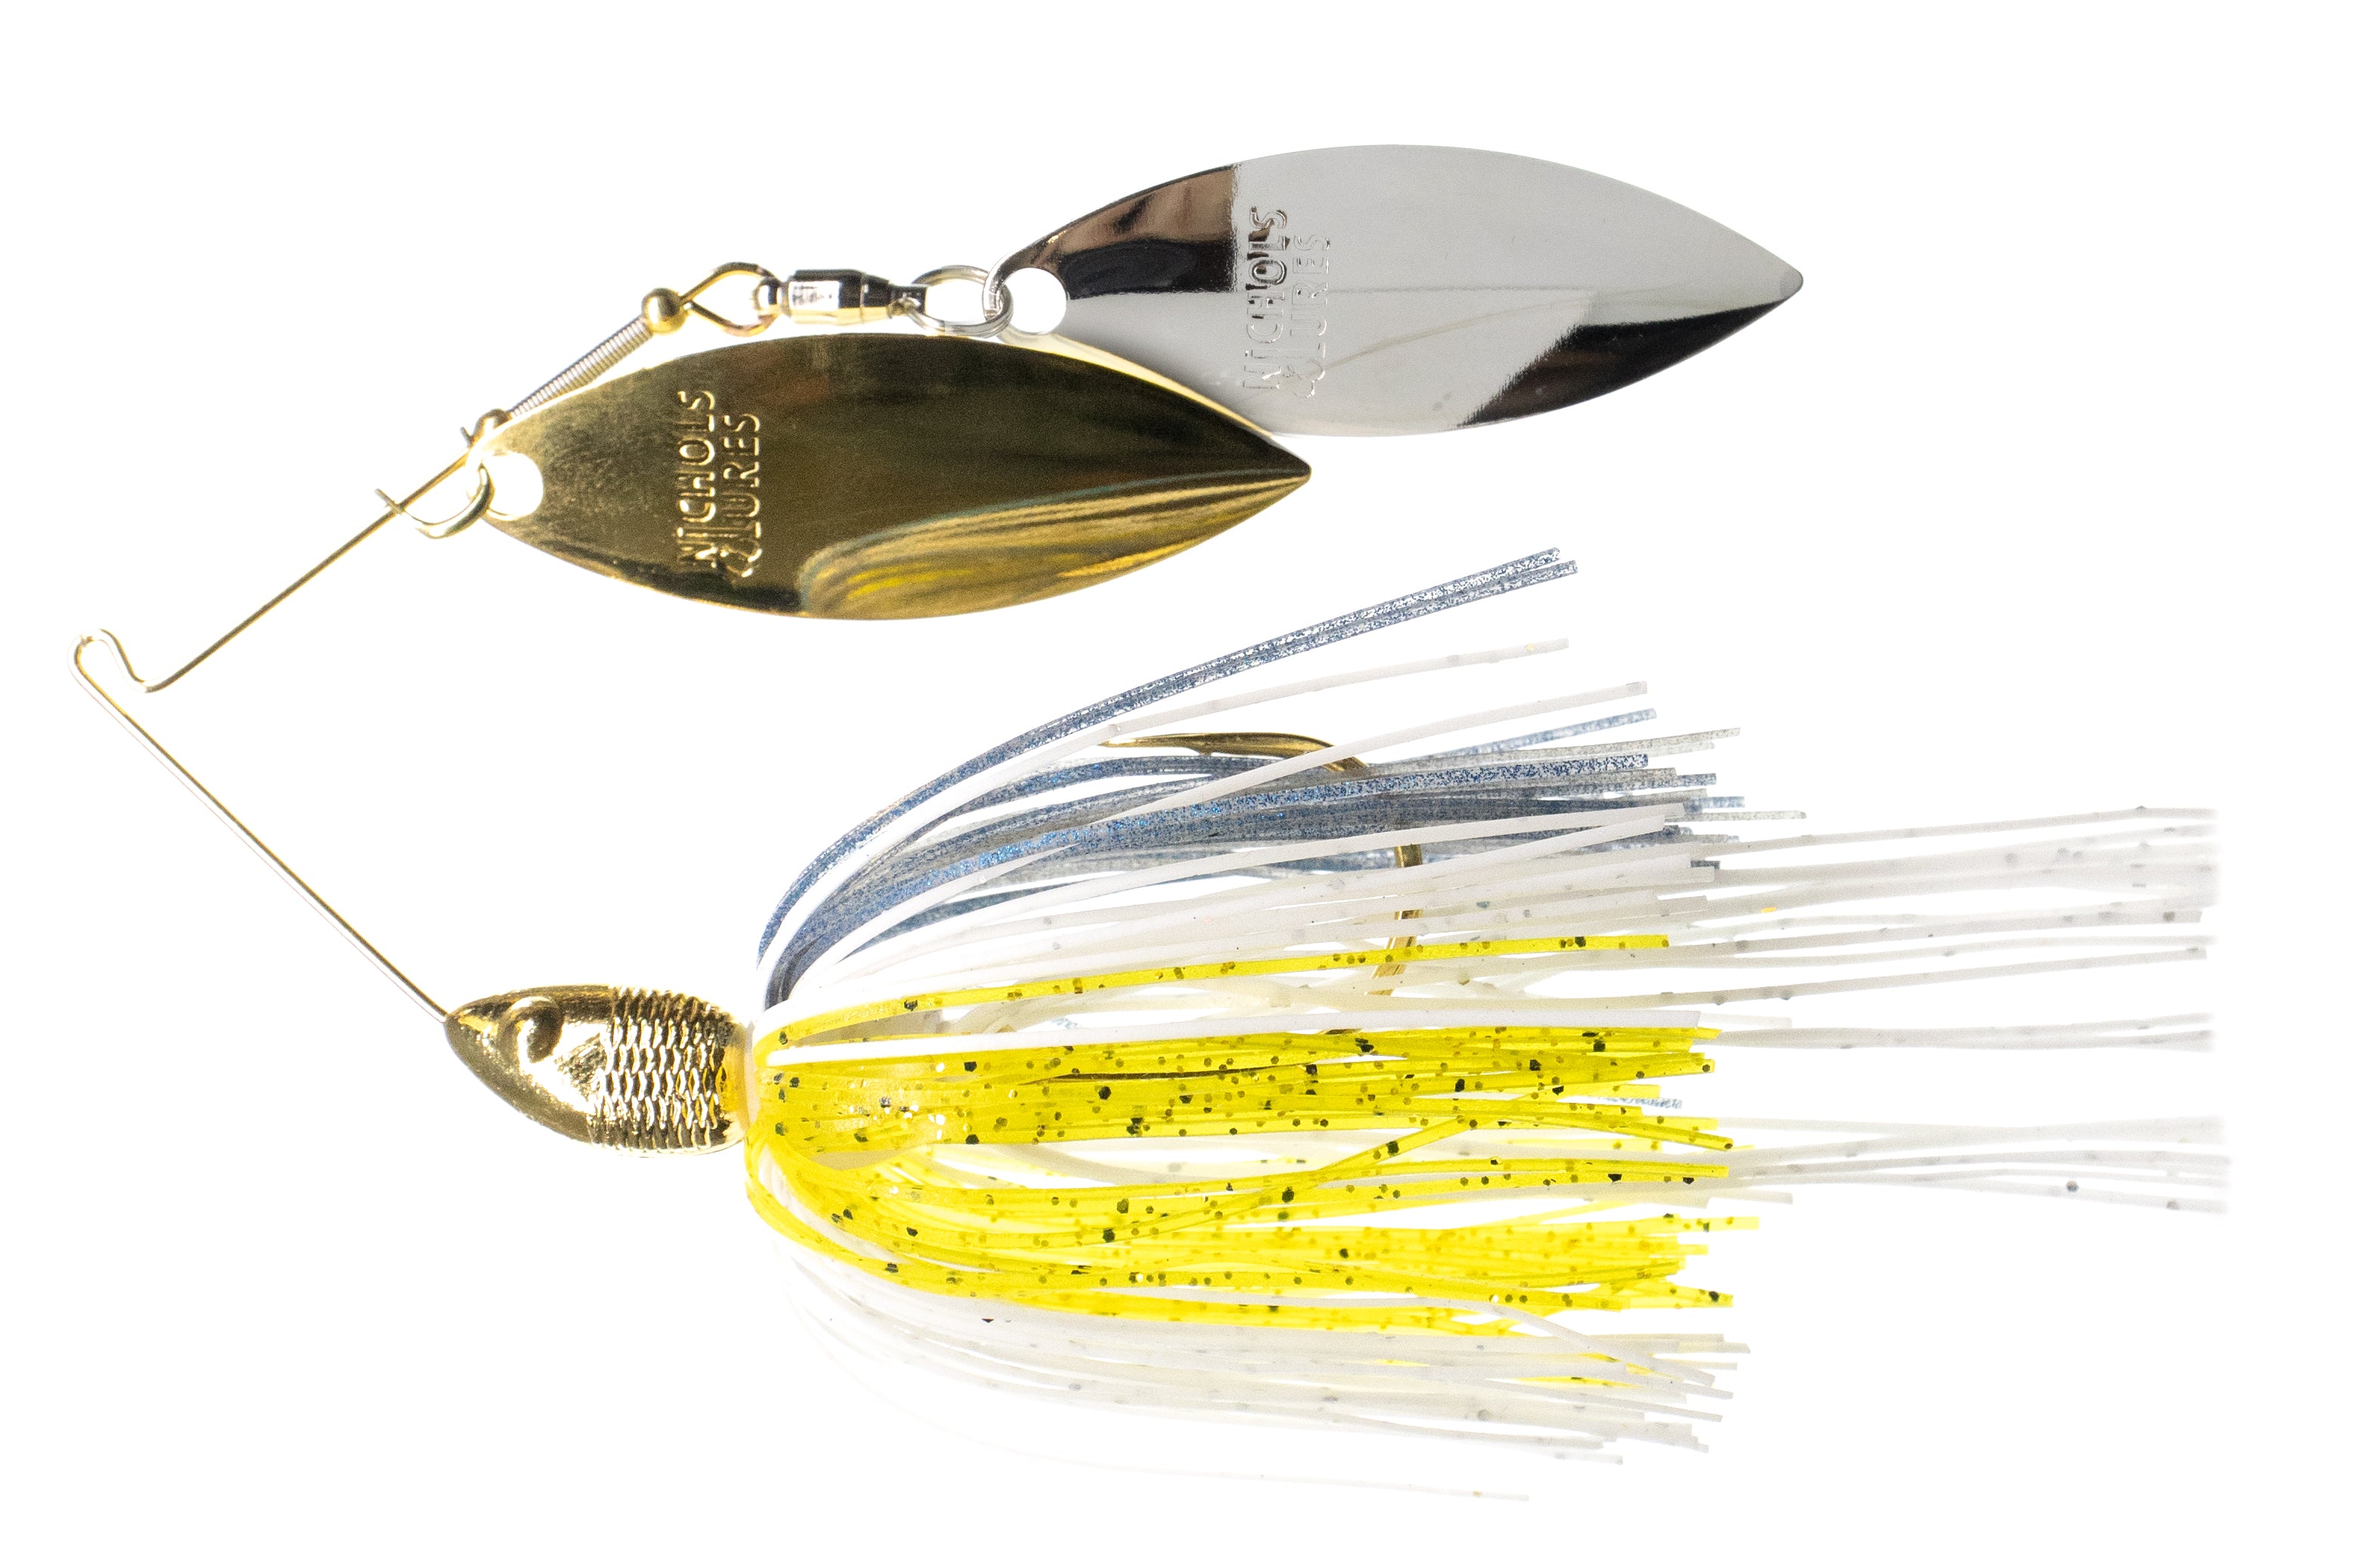 Nichols Lures Pulsator Double Willow Spinnerbait